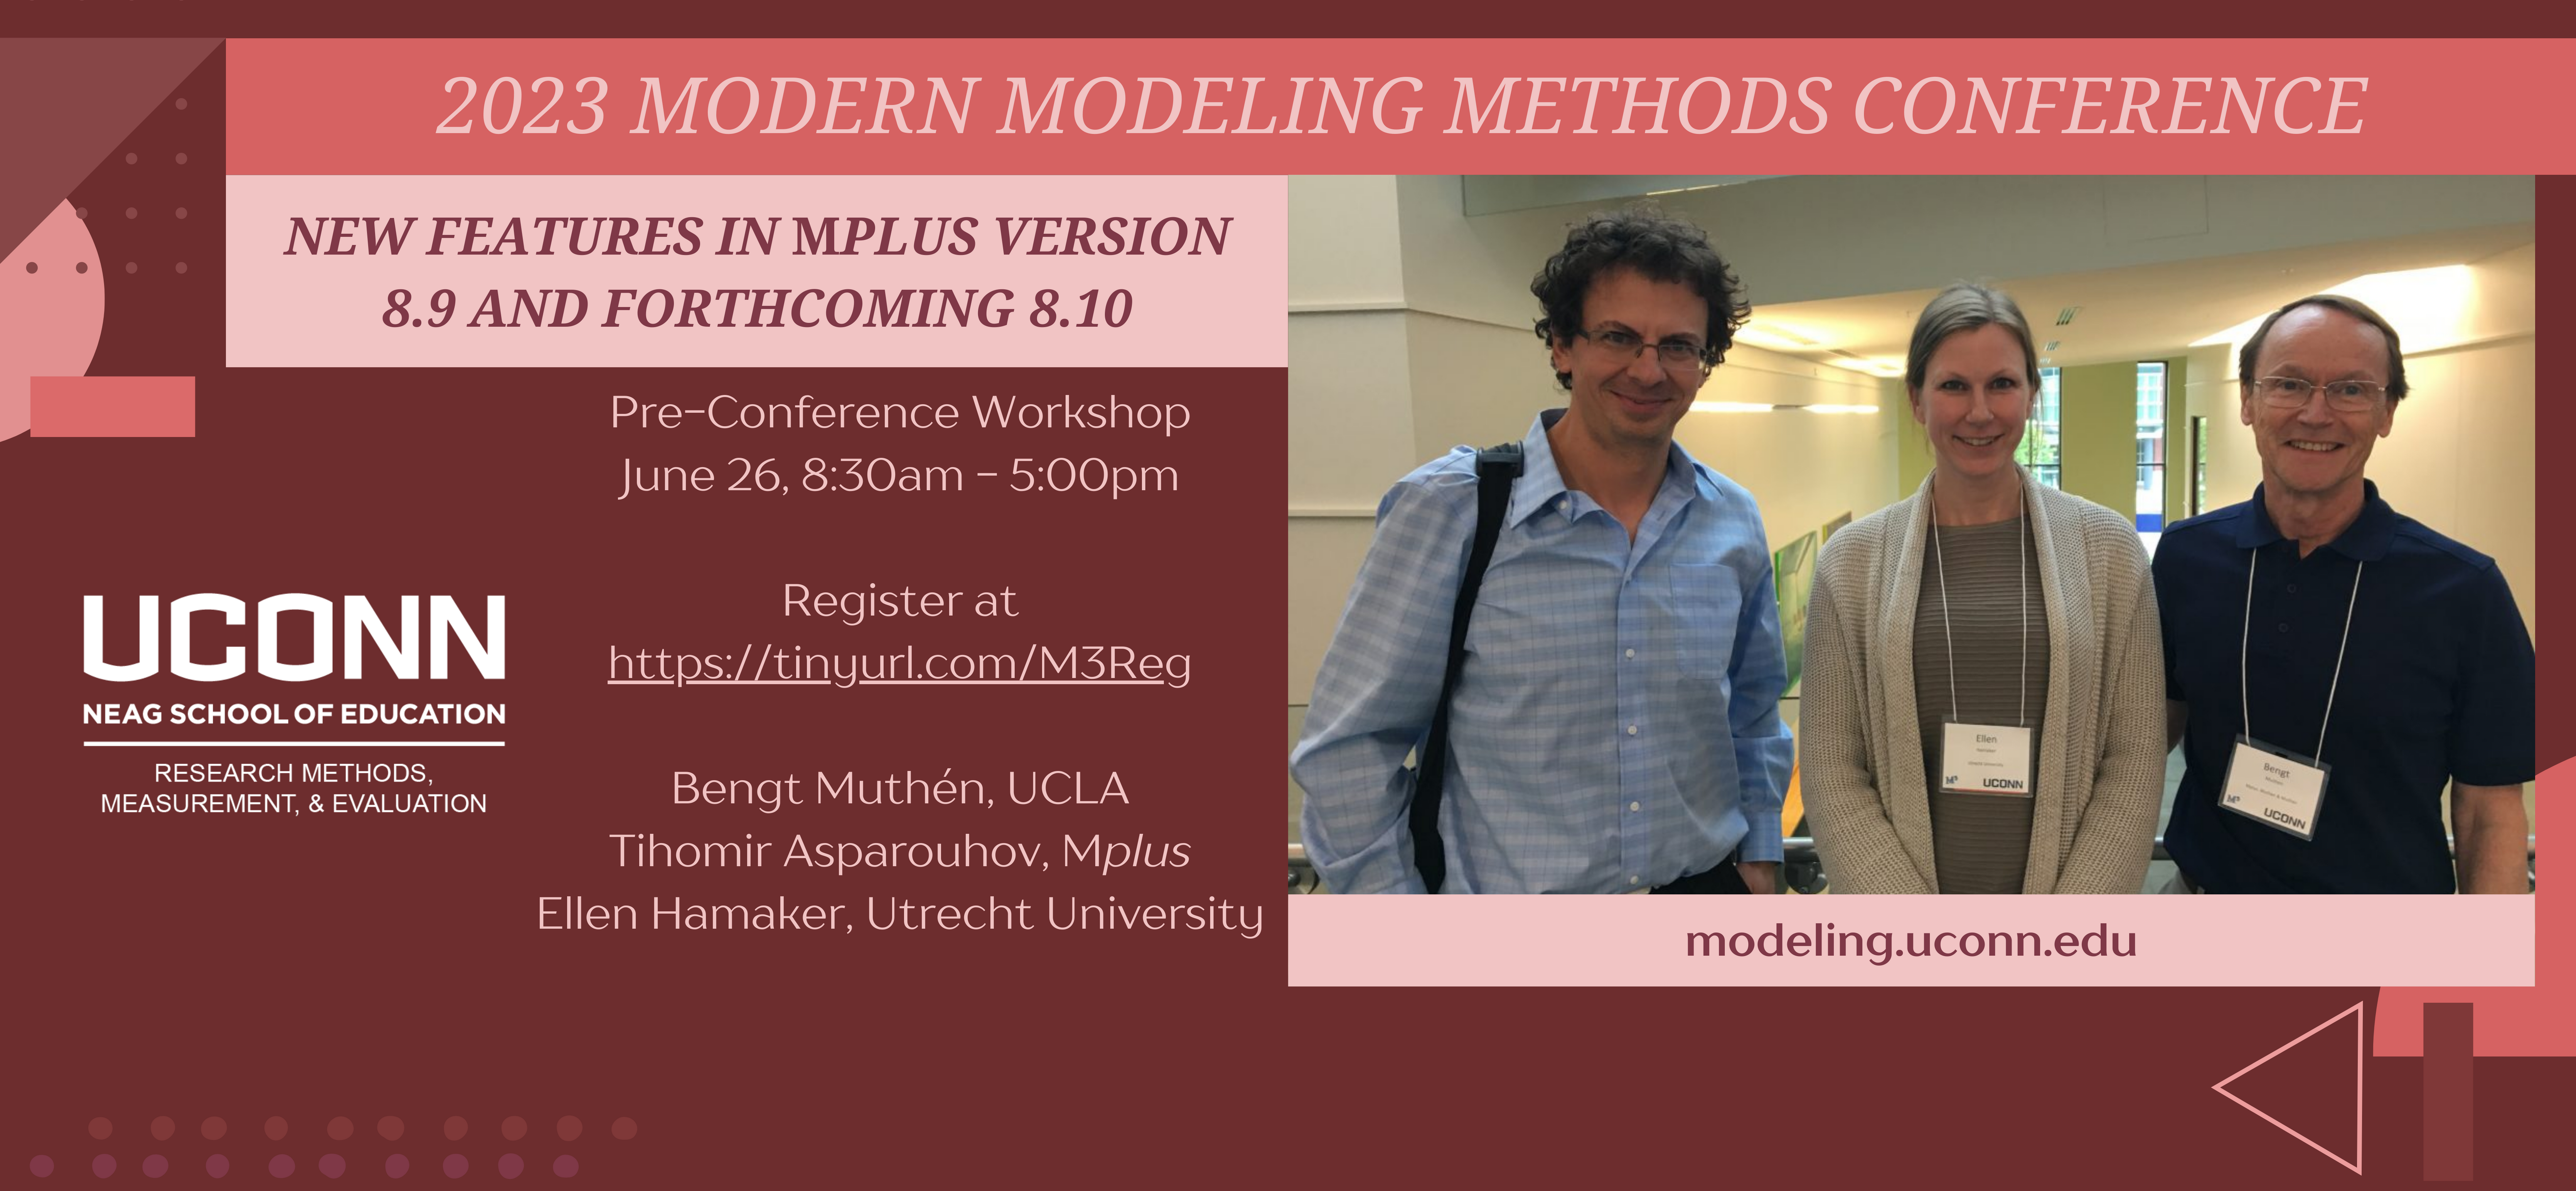 Drs. Bengt Muthén, Tihomir Asparouhov, & Ellen Hamaker will Present a Full-Day Pre-Conference Workshop at the 2023 Modern Modeling Methods Conference, on June 26. Early-Bird Registration Ends May 31!